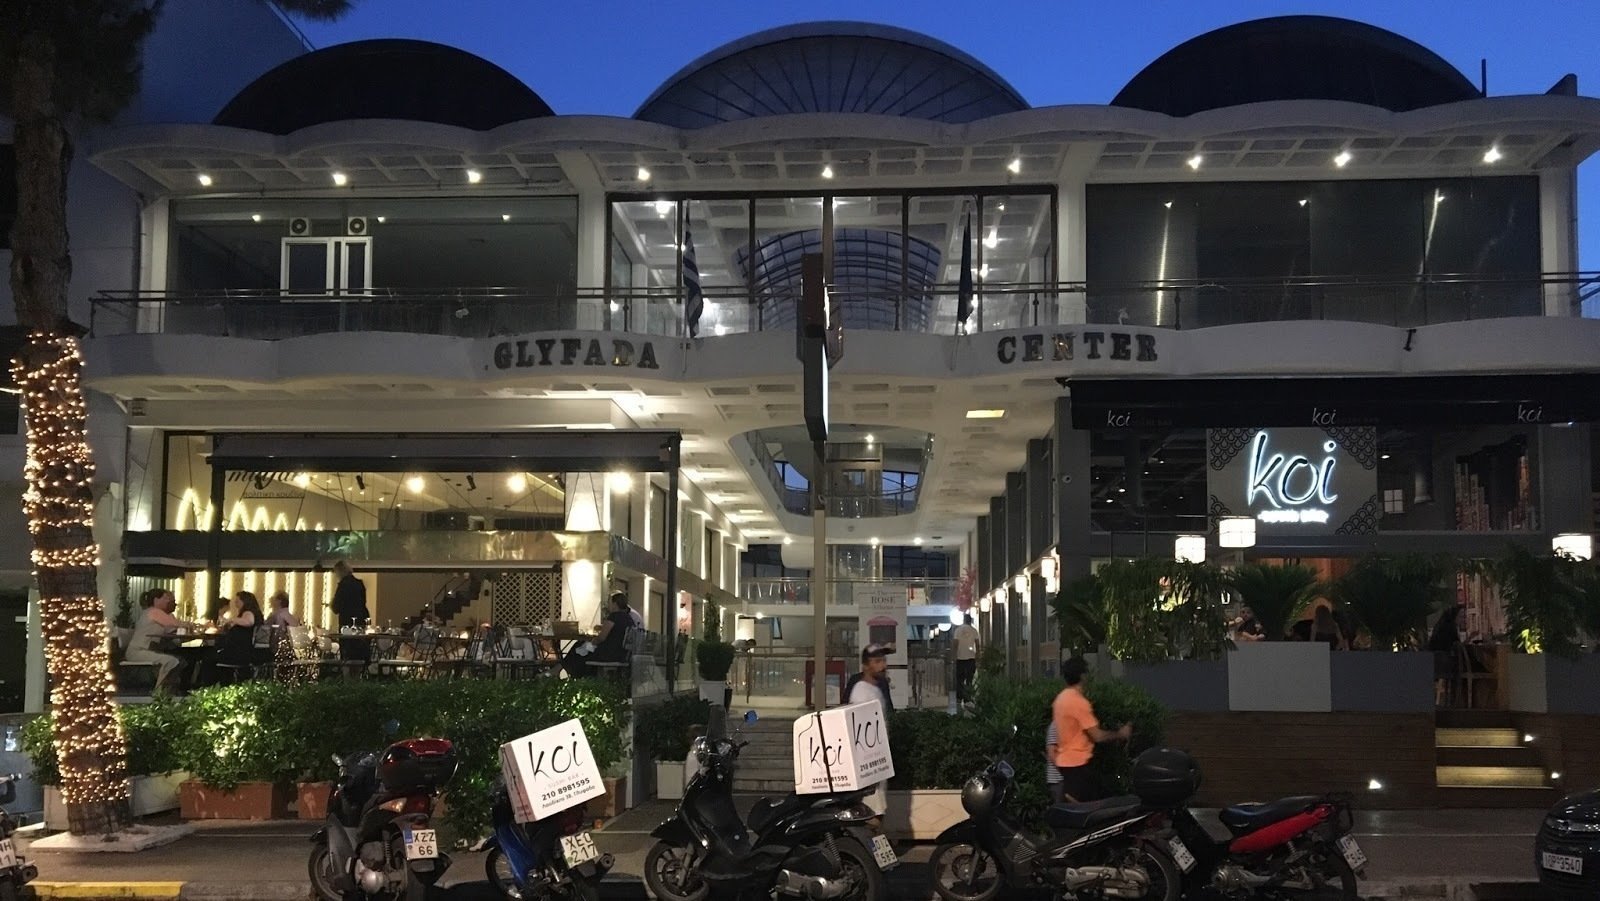 <span class="translation_missing" title="translation missing: en.meta.location_title, location_name: Glyfada Center, city: Athens">Location Title</span>